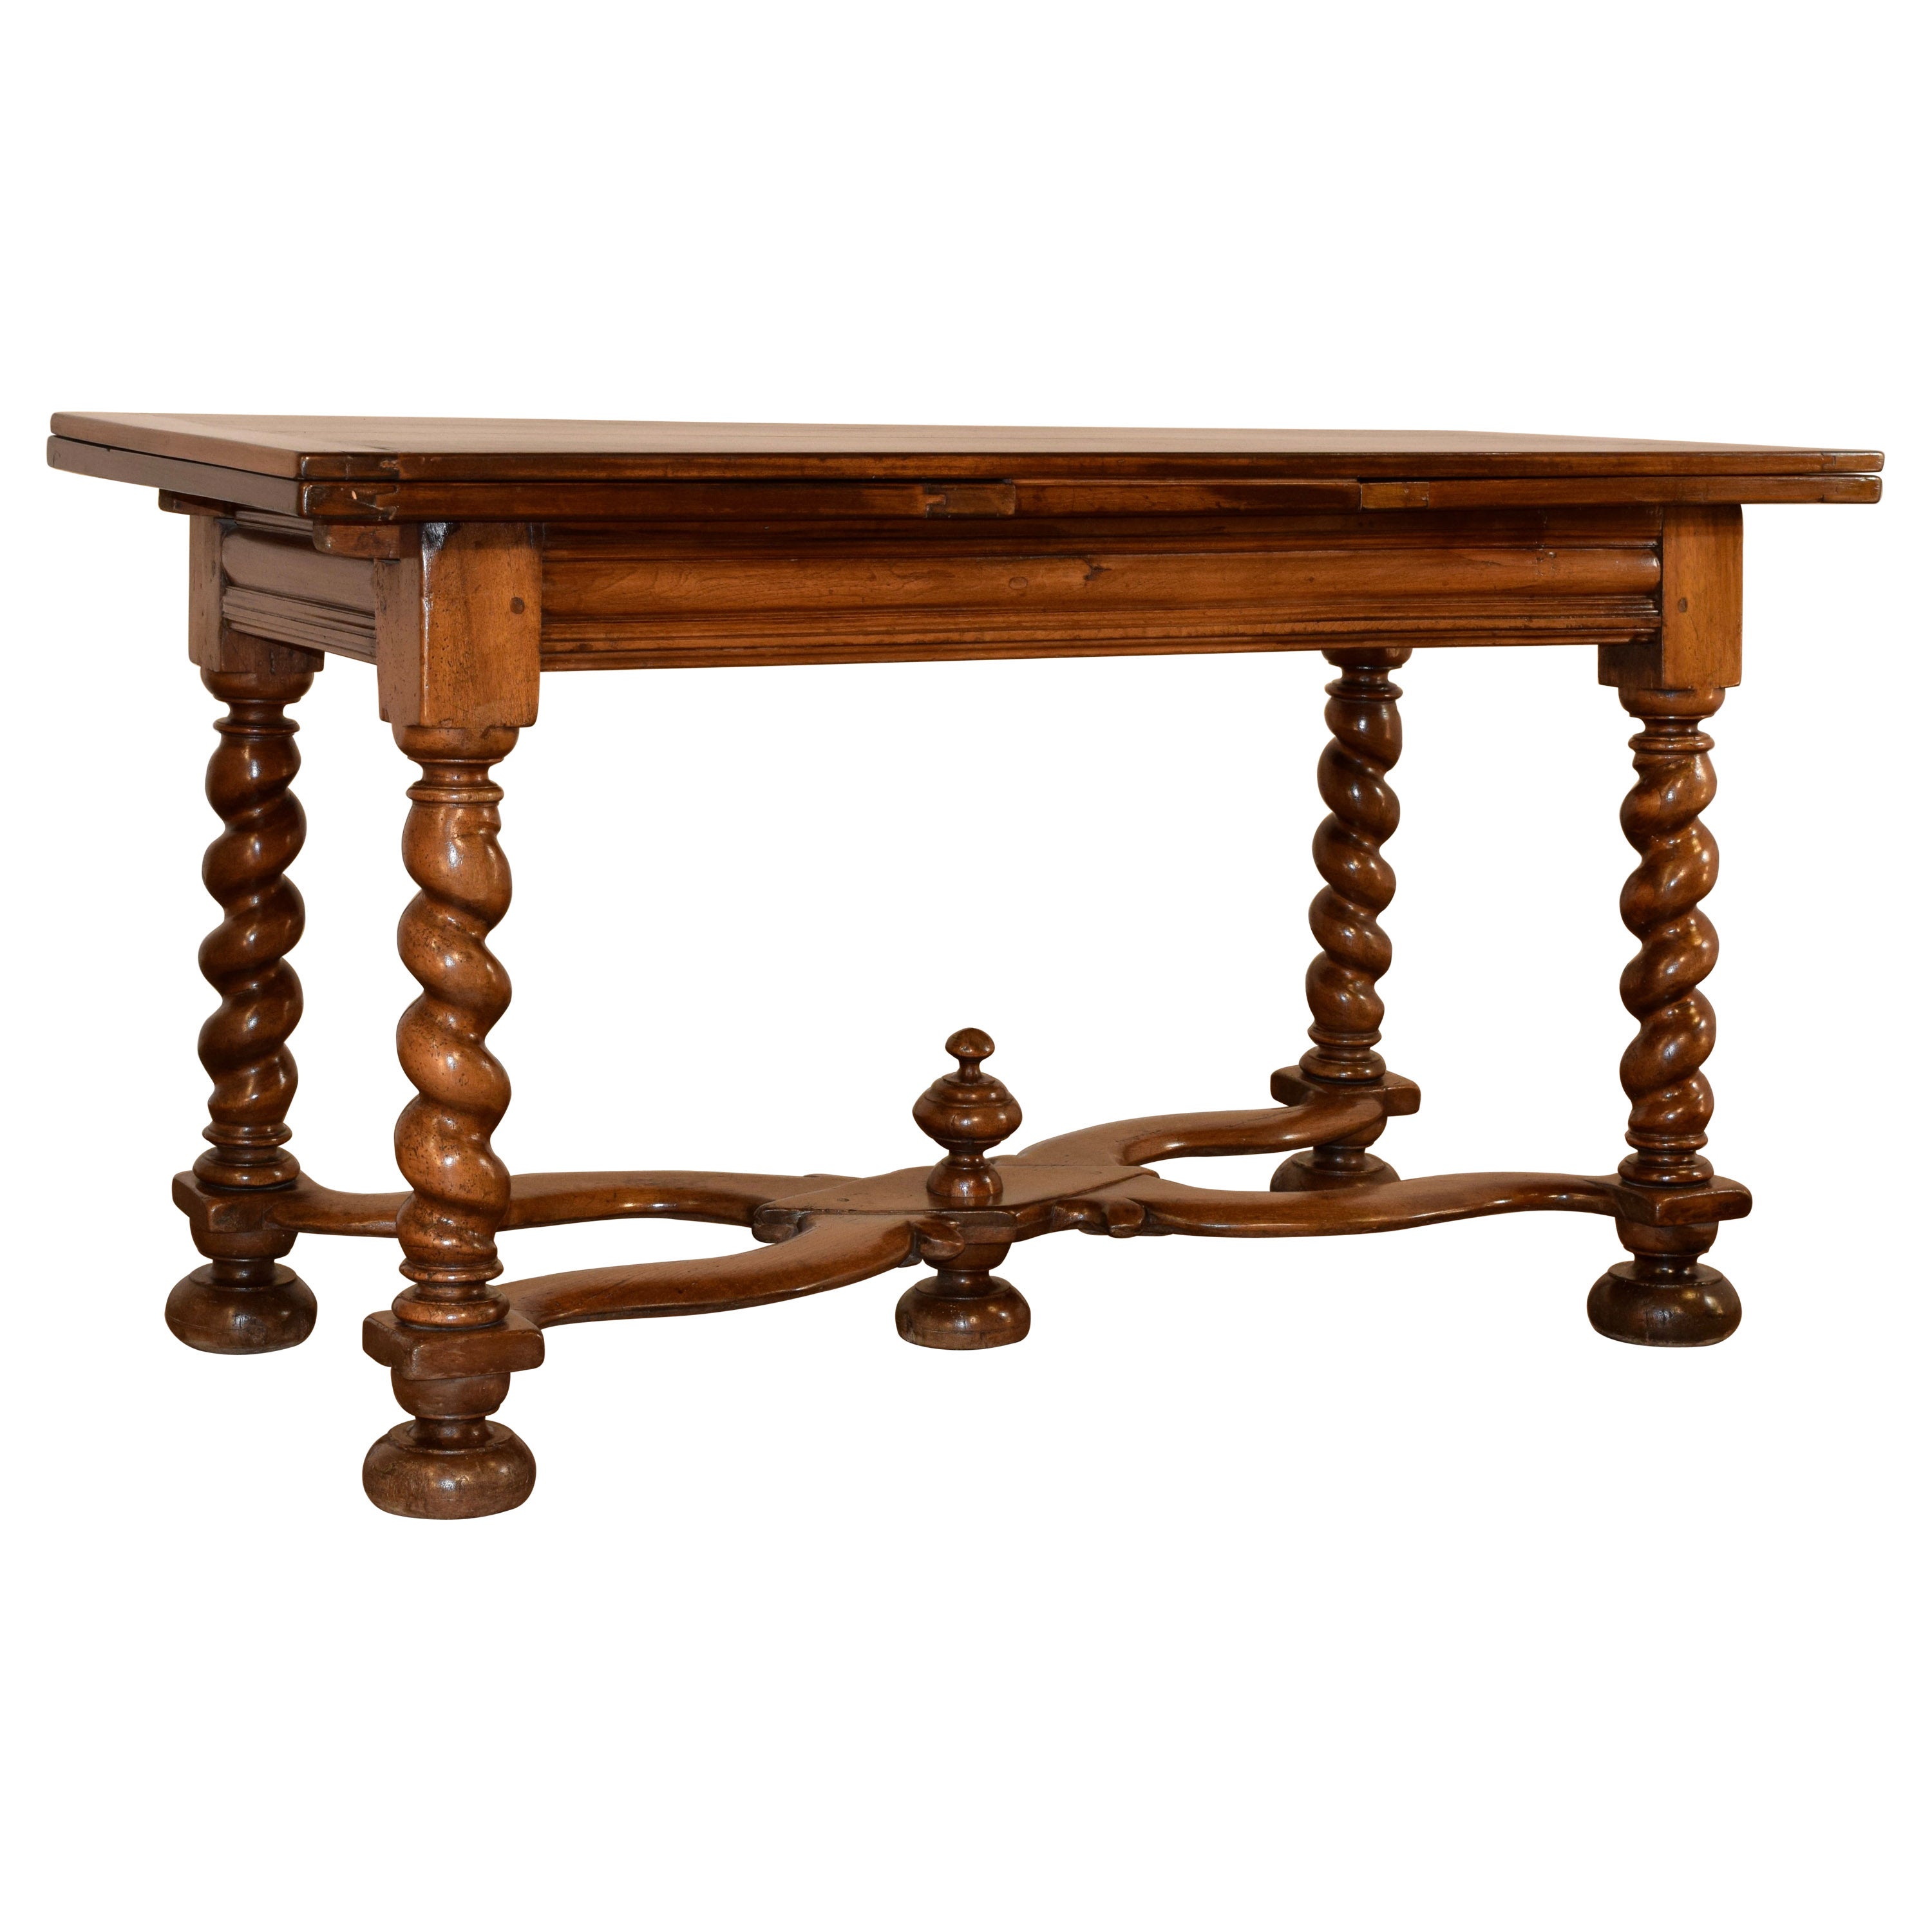 Early 19th Century French Draw-Leaf Table